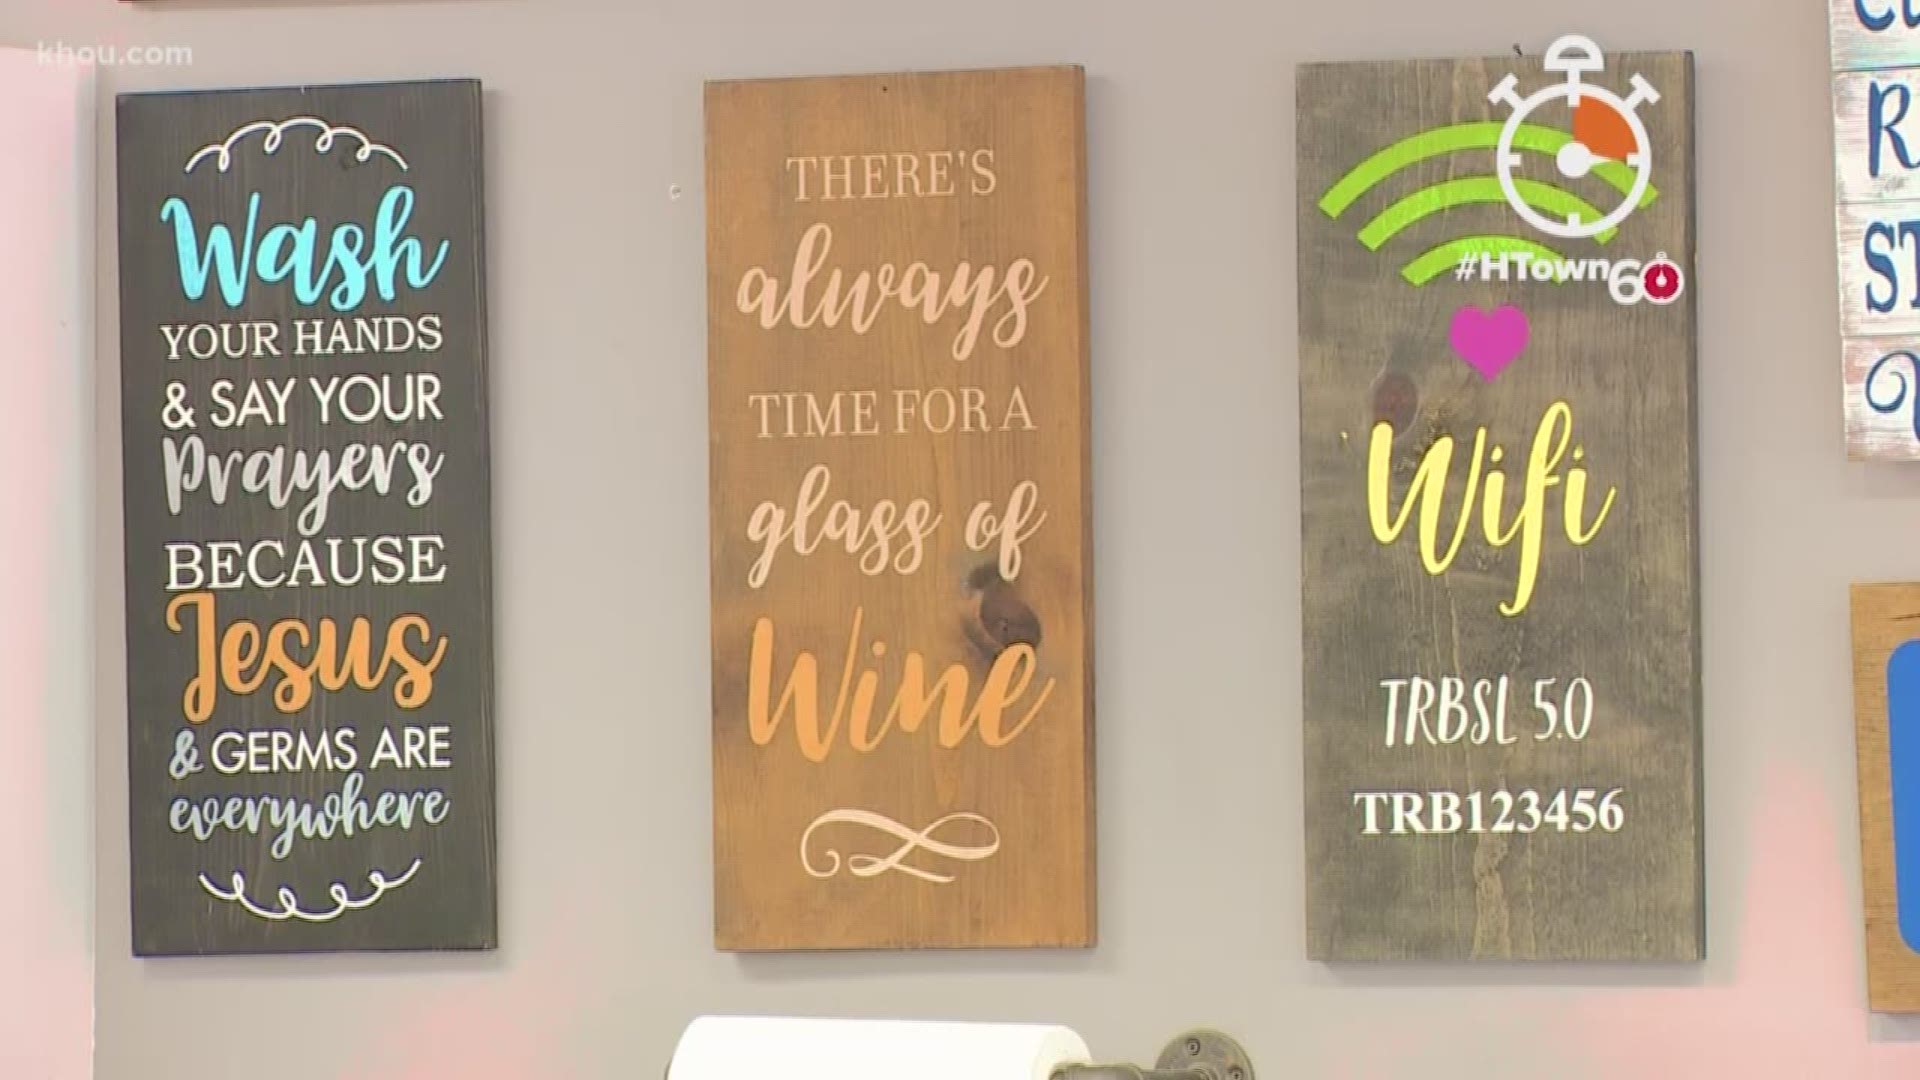 Looking to add a new piece of home décor? From customized signs to trays to even door mats – in this morning’s HTown60 – where you can go to personally create these fun pieces!